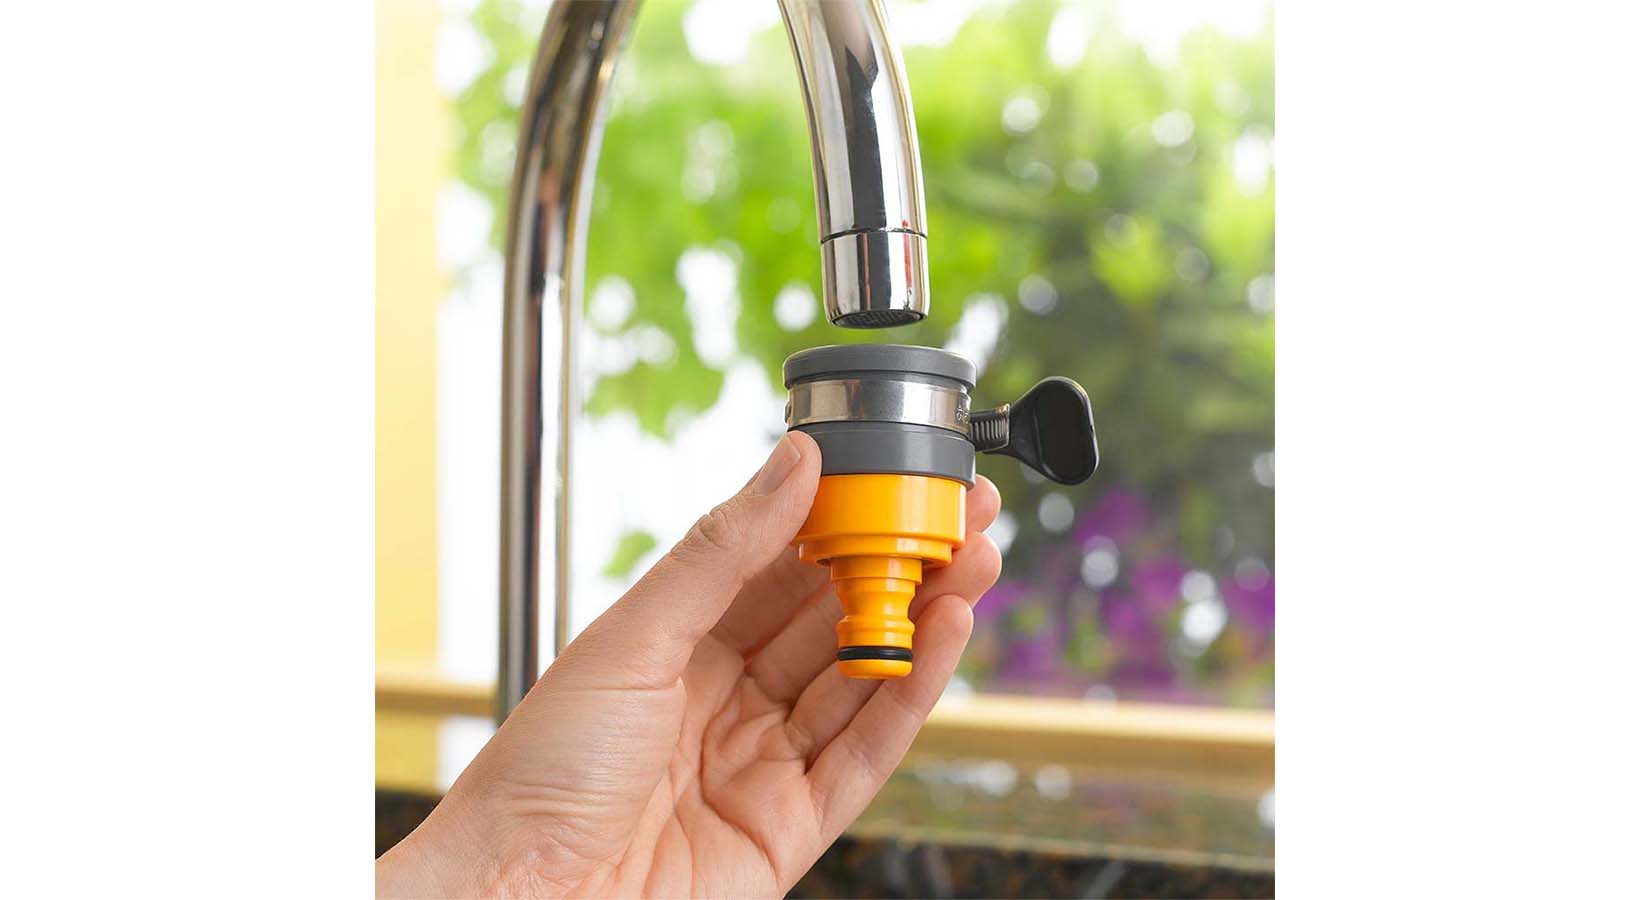 How to connect garden hose to indoor tap faucet?